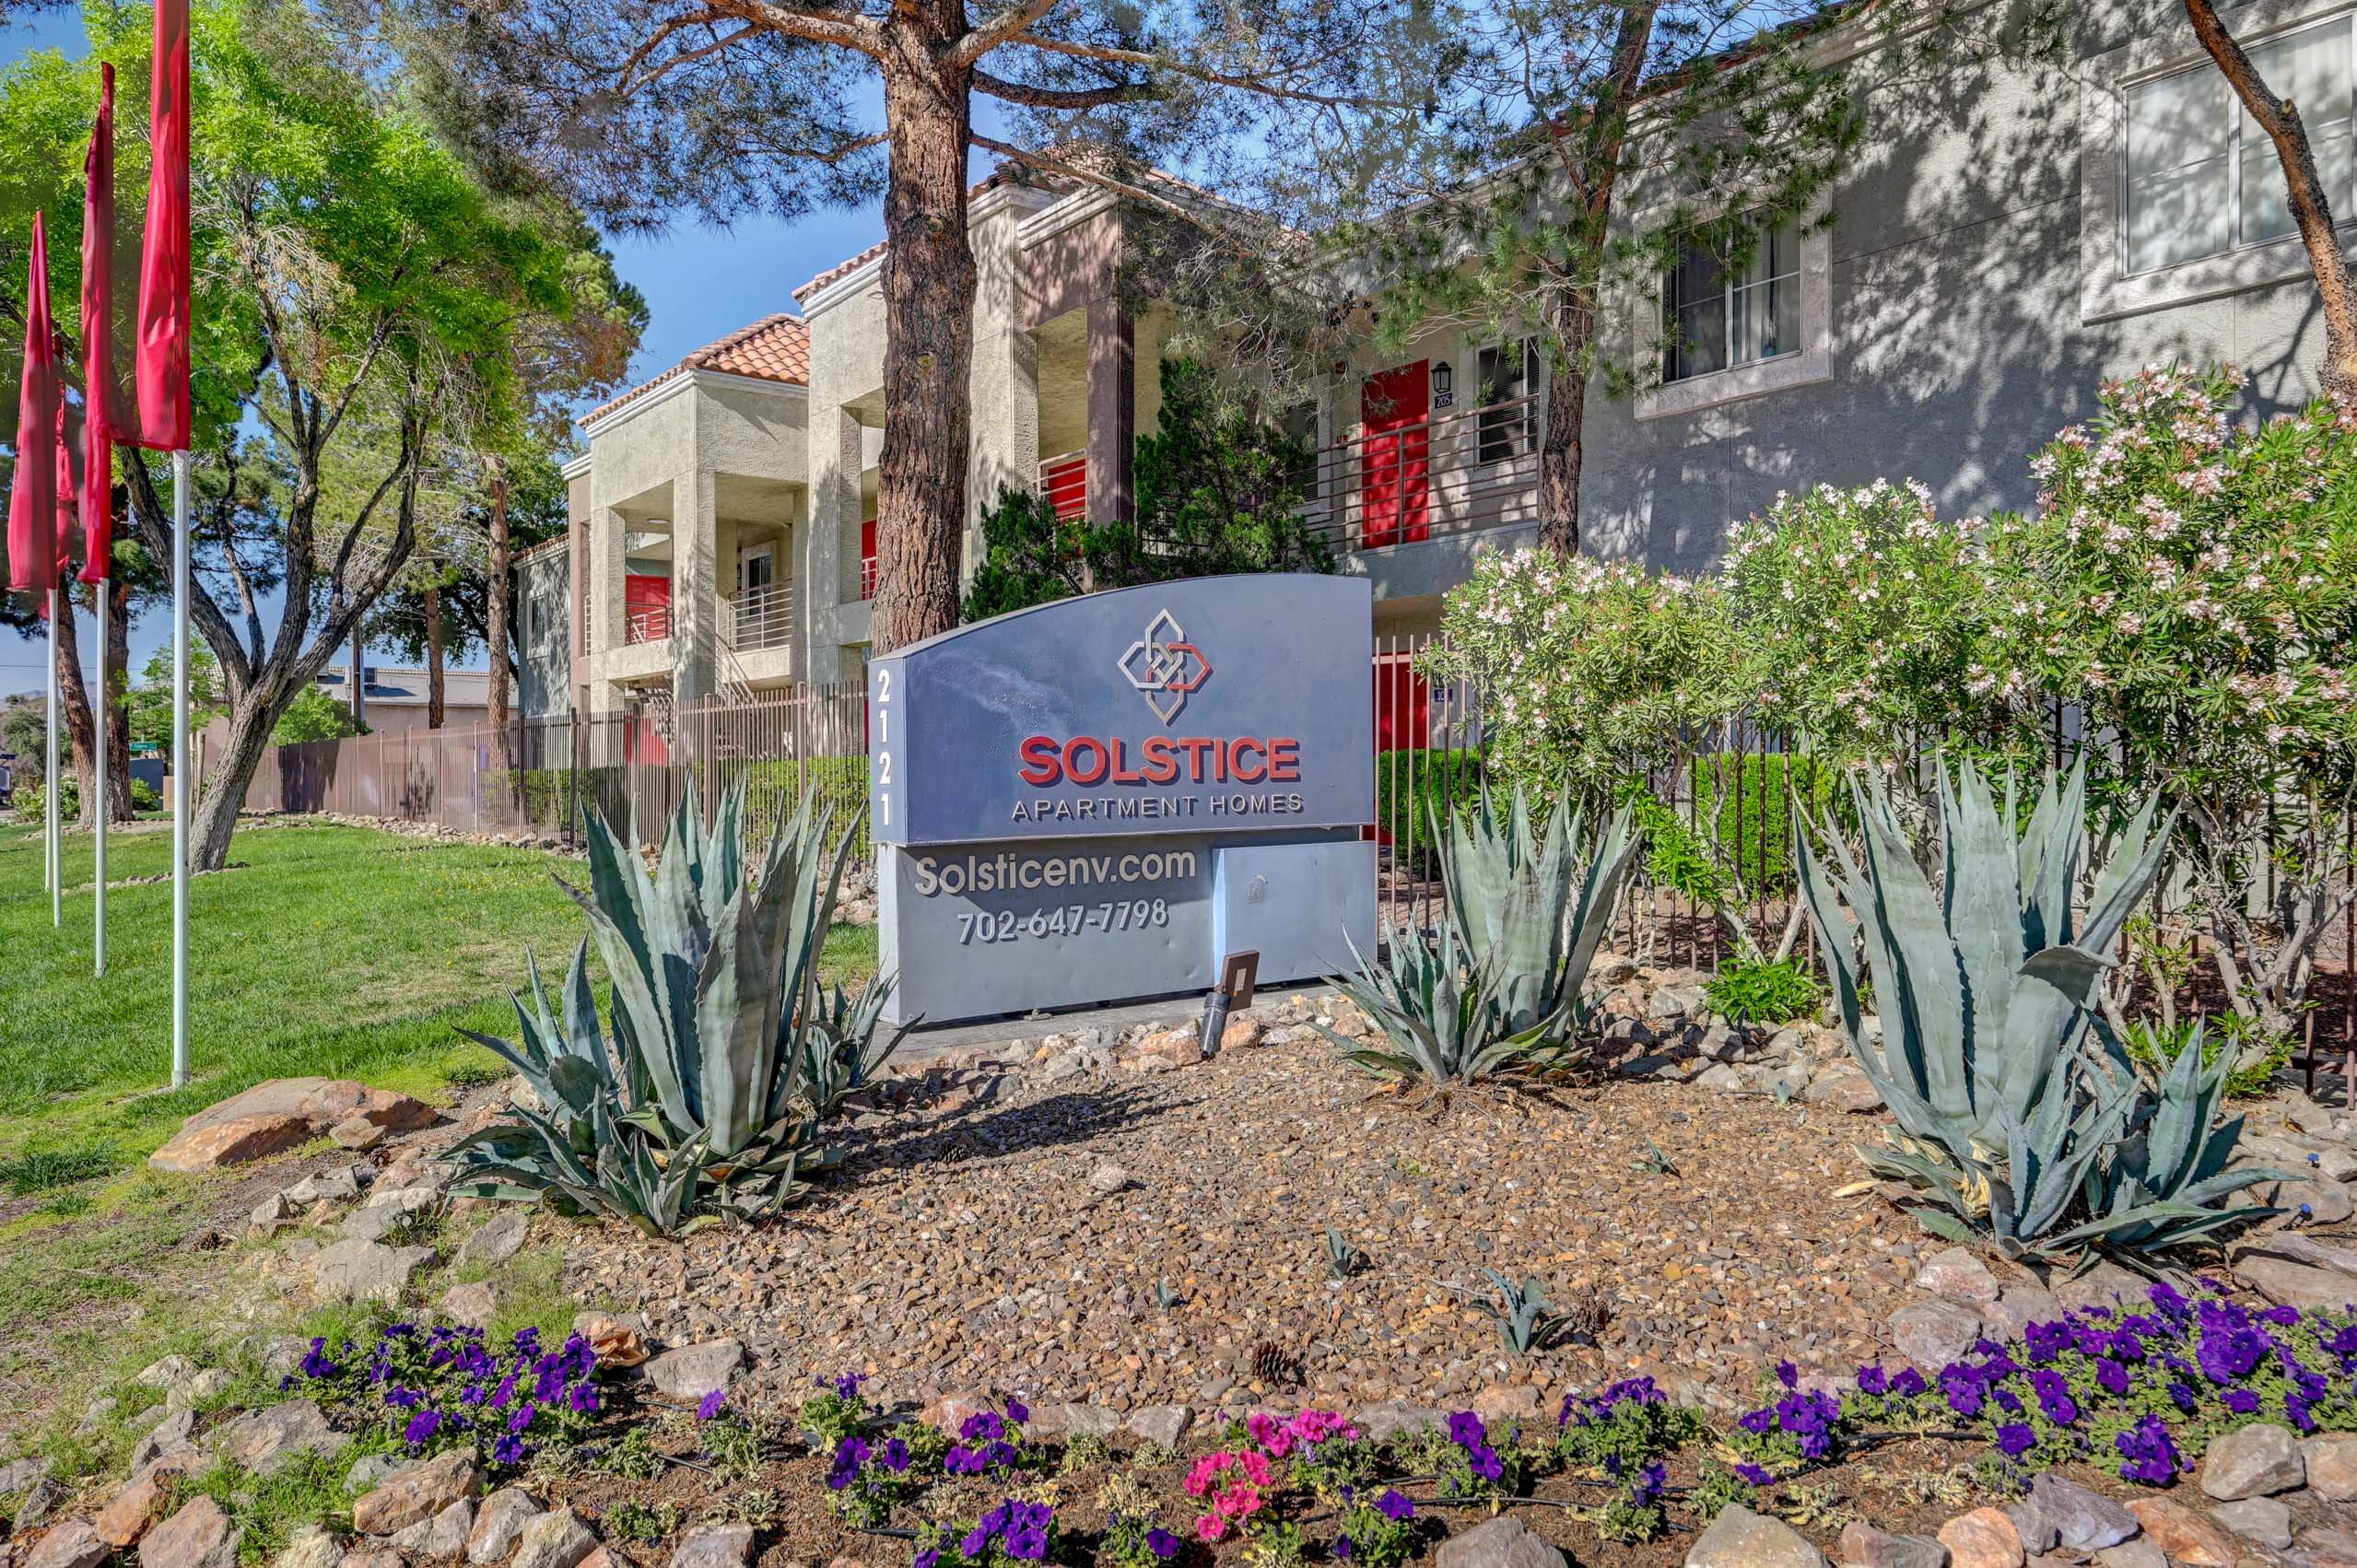 Solstice Apartments entrance sign with flowers